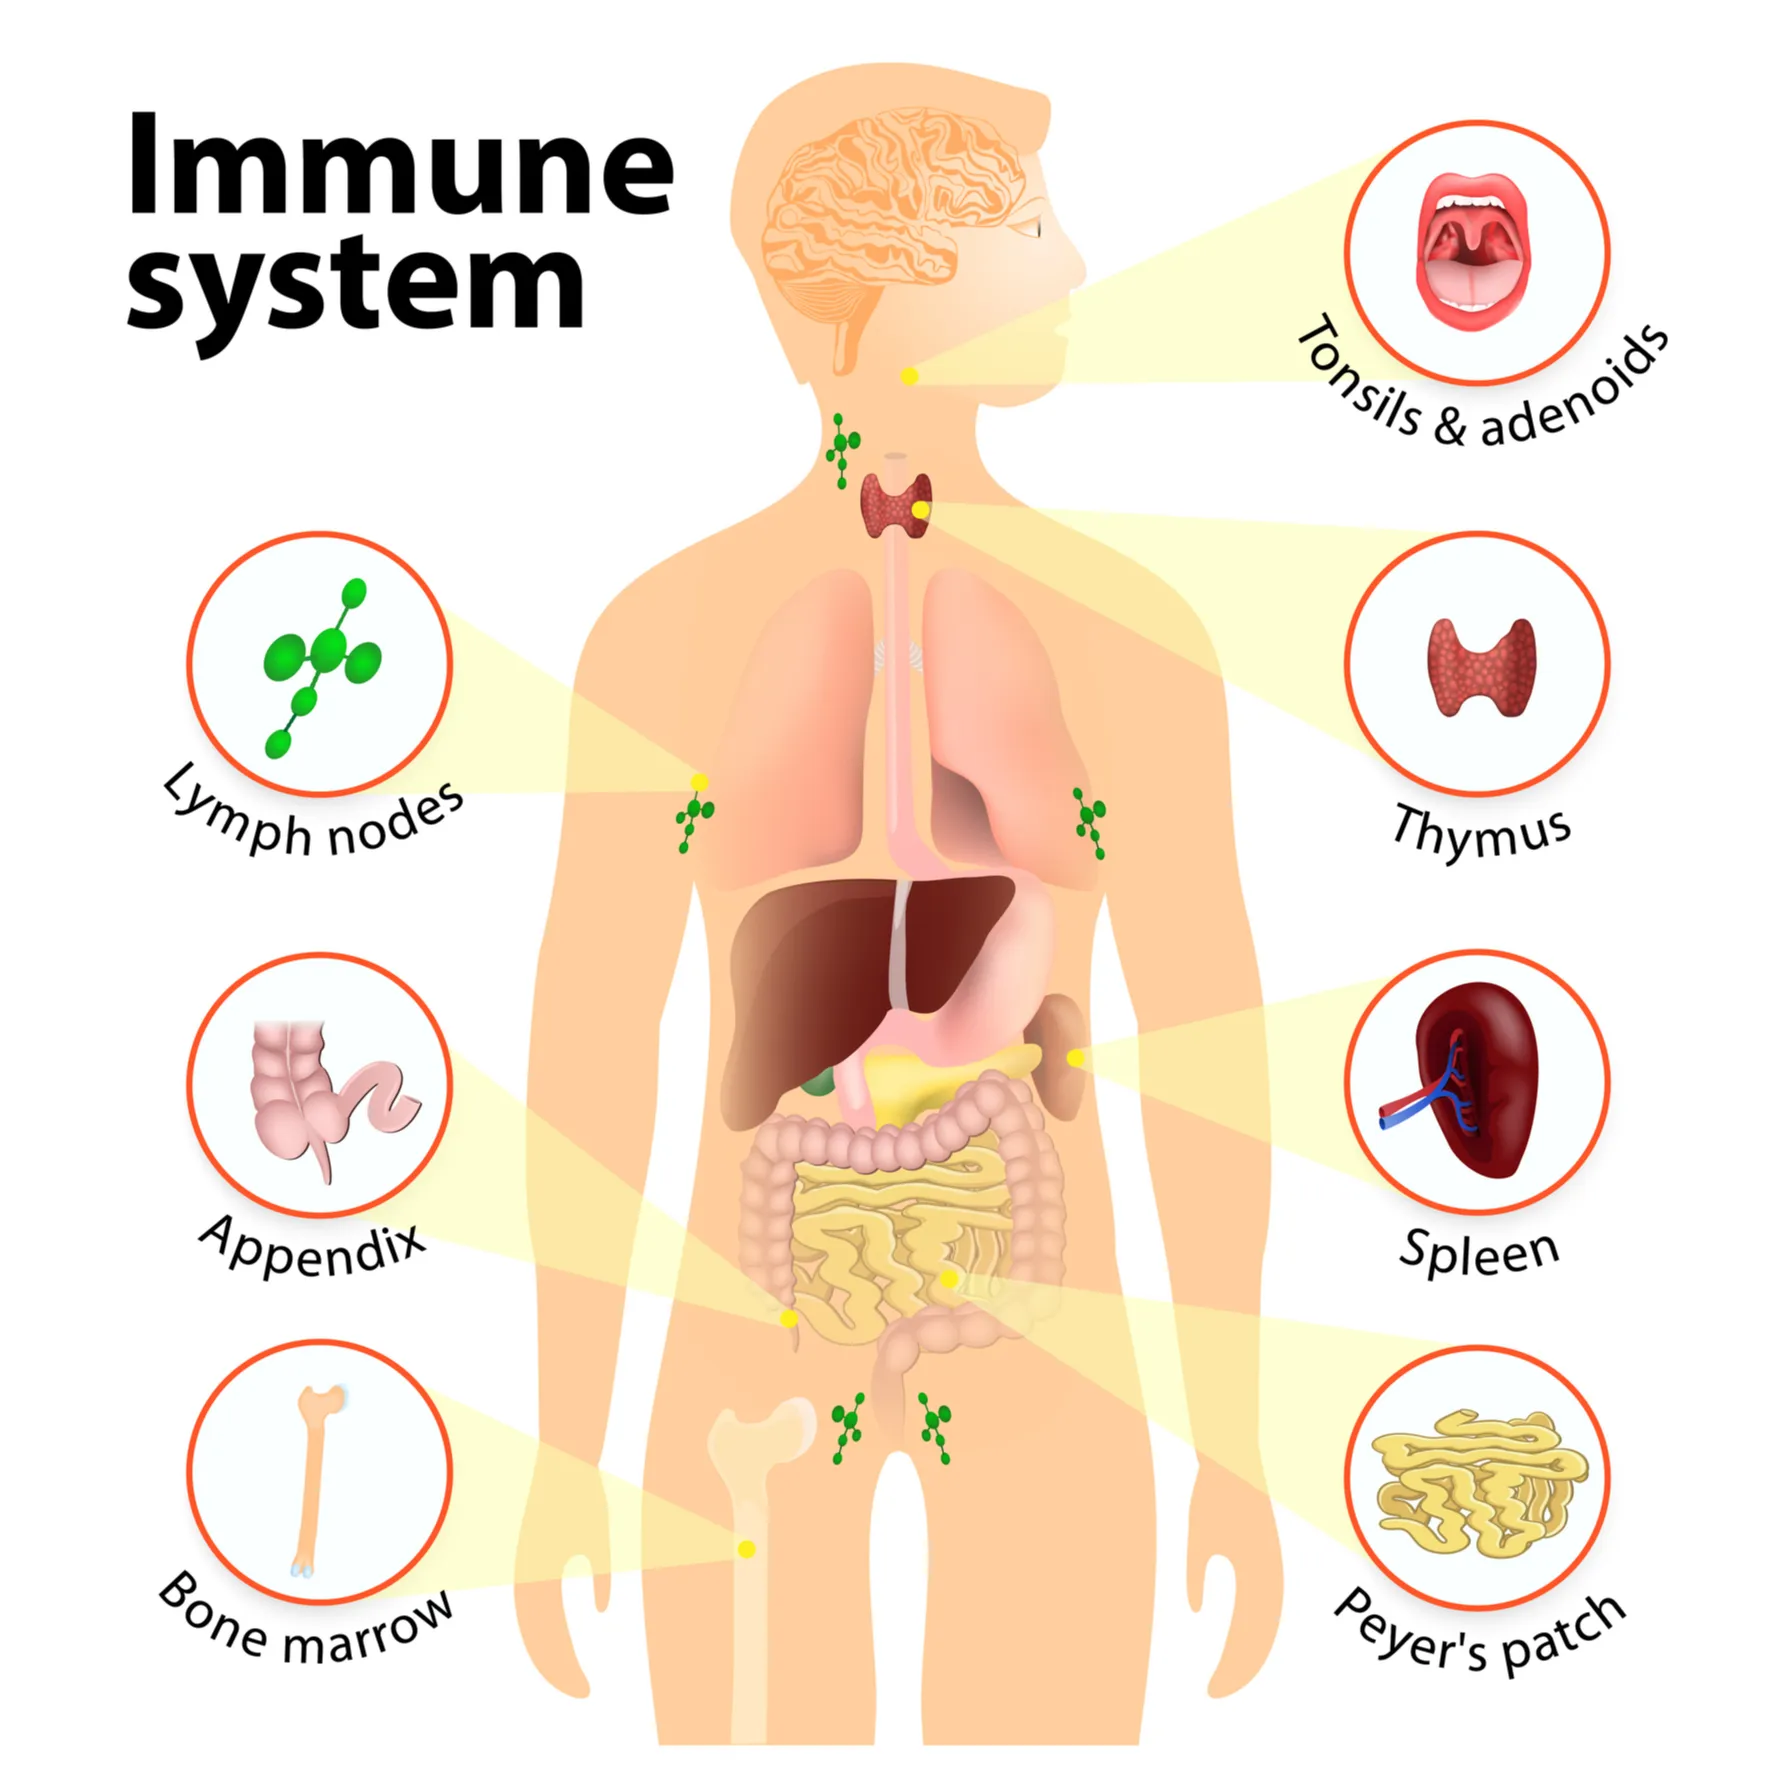 The immune system's dedicated organs. (It is not the complete list!)